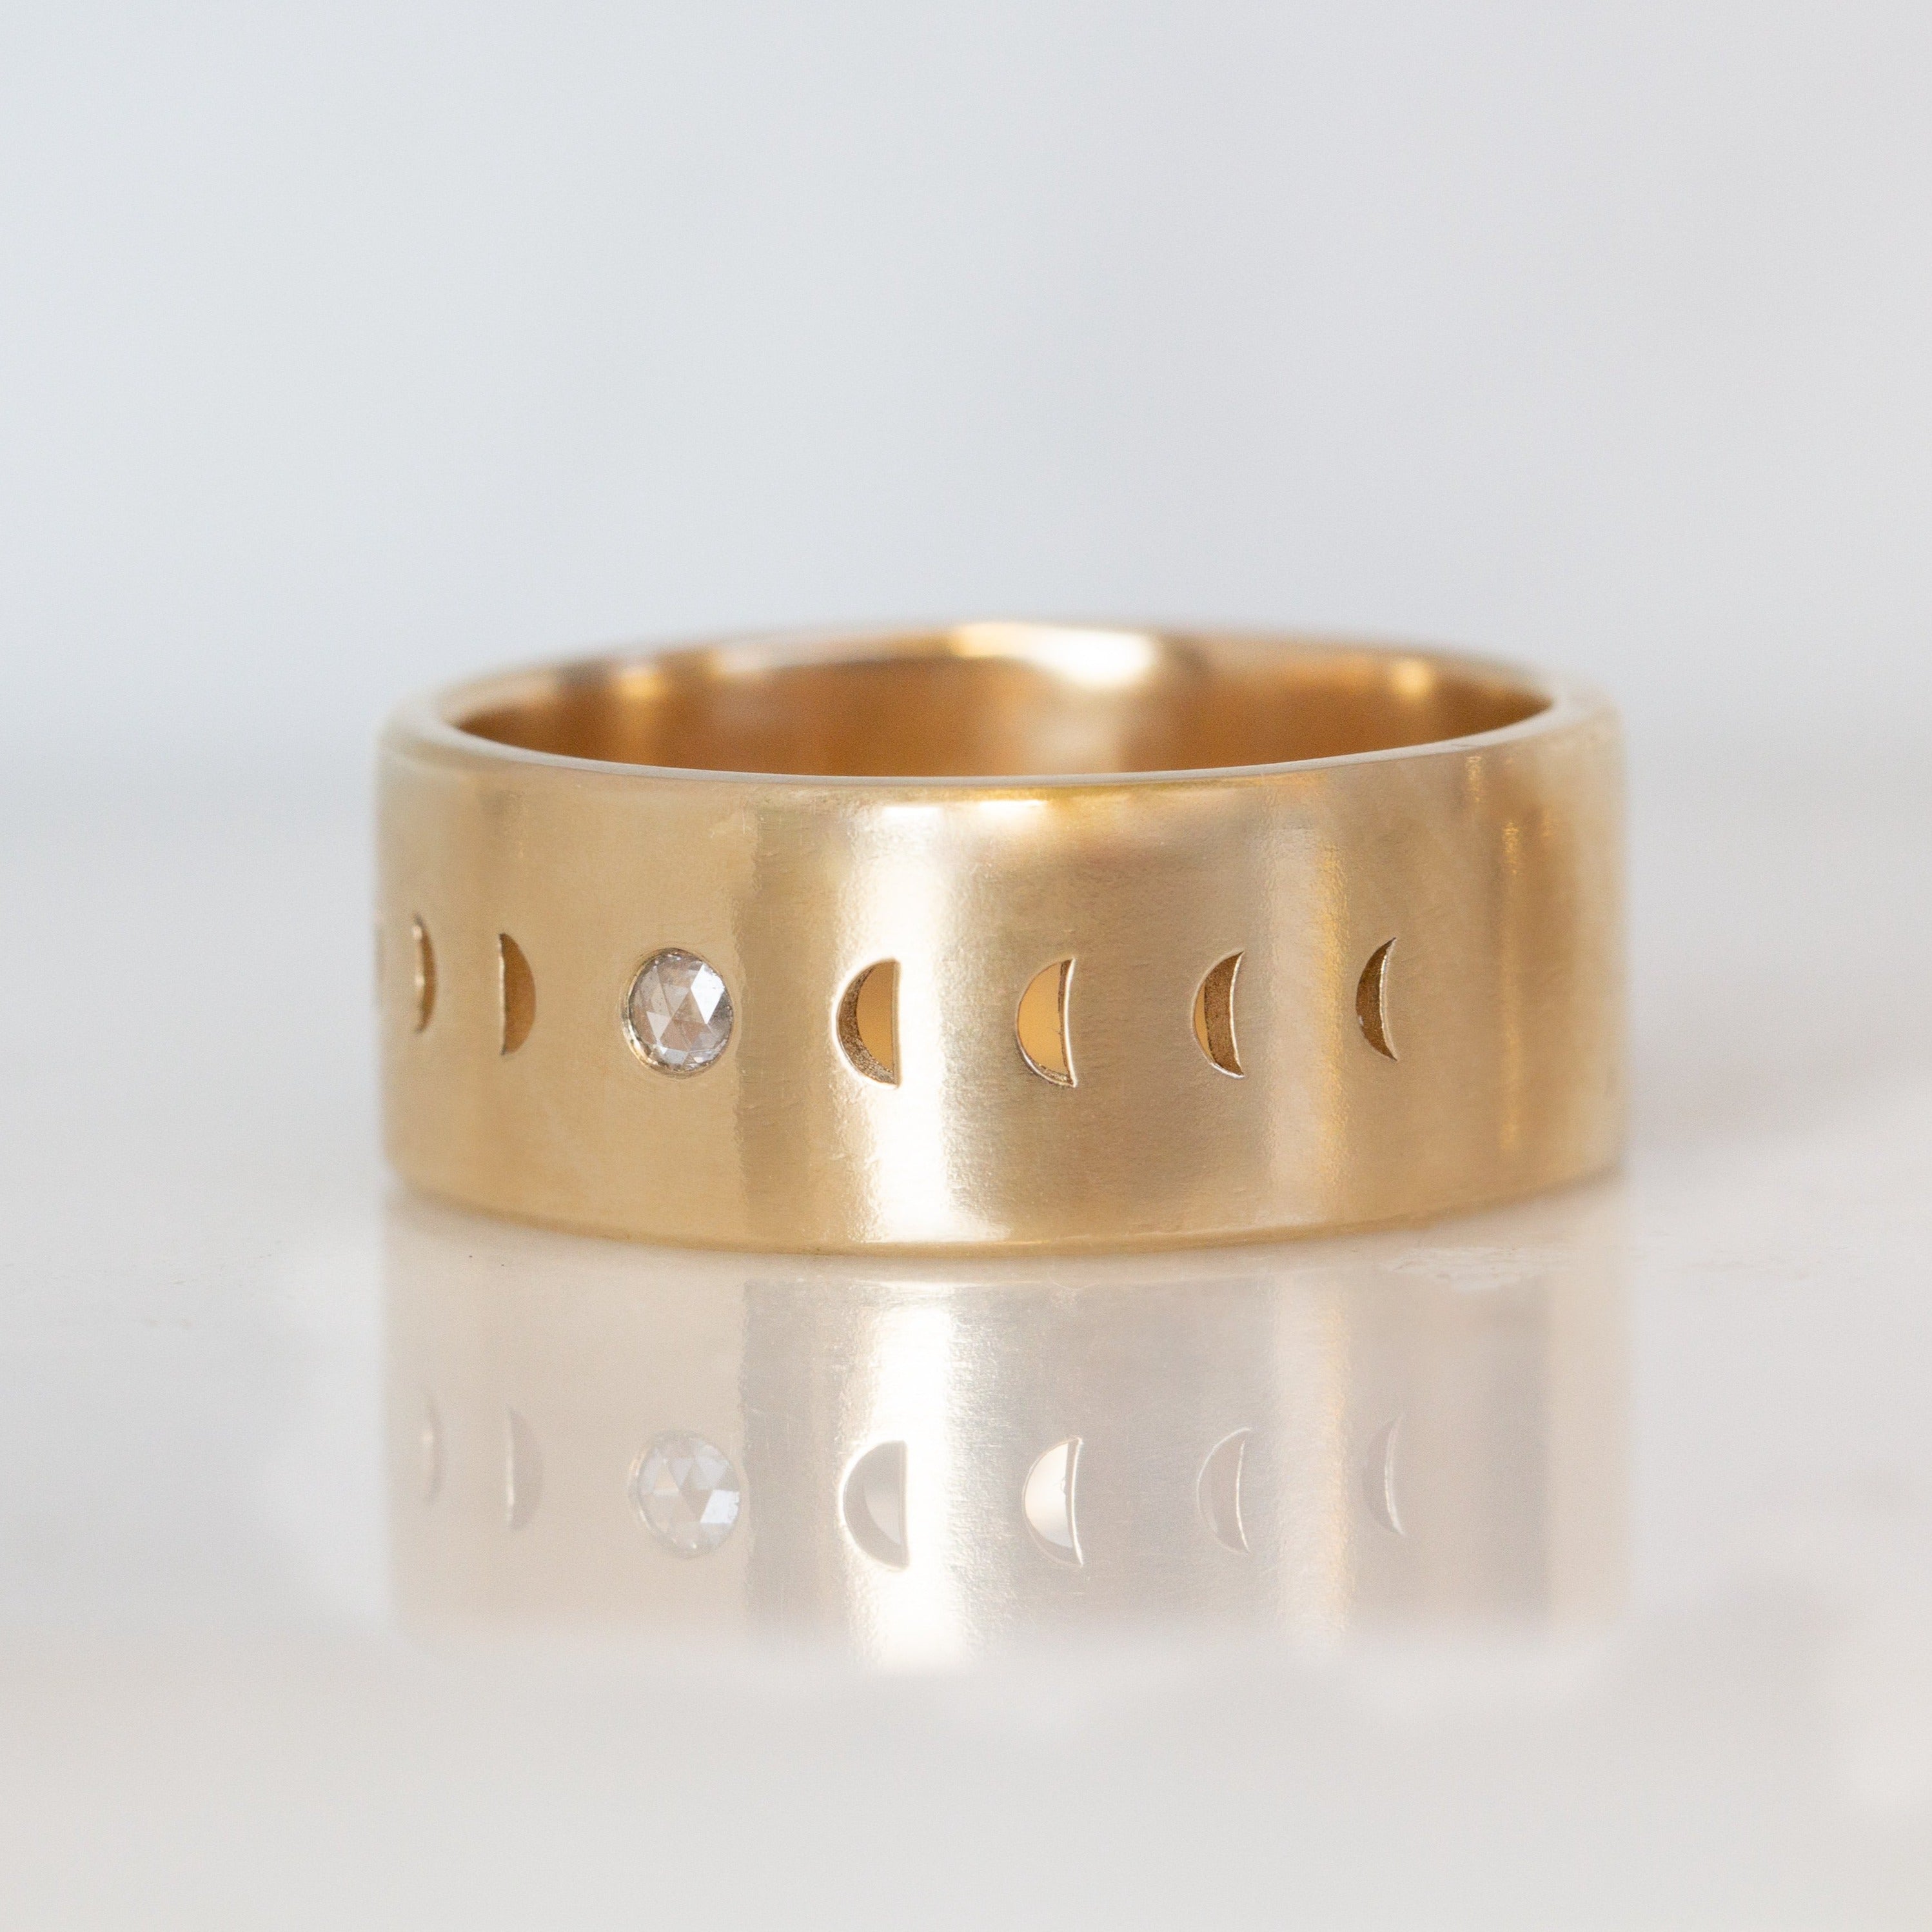 Bisclavret Moon phase Matching Band Set, Wedding band set, Ethical Rose Cut Diamond Wedding ring, Moon phase Wedding rings, 12th HOUSE JEWELRY, engagement rings made by hand, ethically sourced jewelry, custom made in the US jewelry, astrology, 12th house meaning, 12th house astrology, Kelly Lannen, Kelly Star Lannen, solid gold rings, rose cut diamonds, indie wedding, alternative wedding 